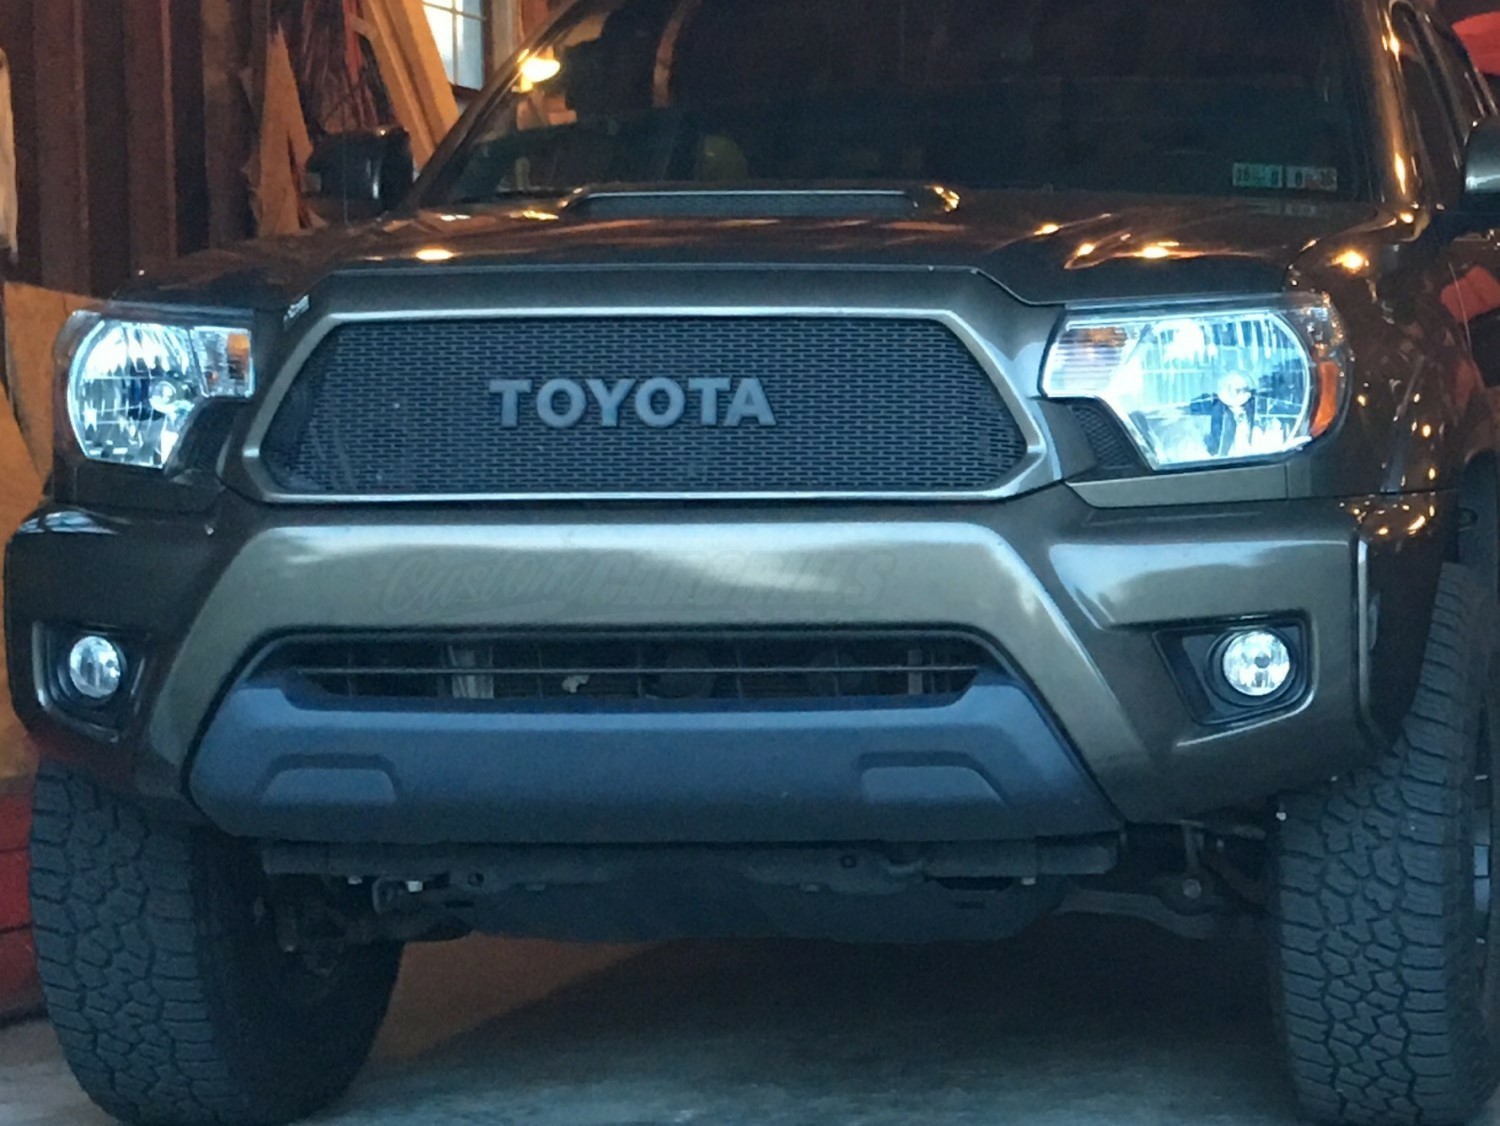 2012 - 2015 Toyota Tacoma Grill Mesh With Toyota Emblem #3